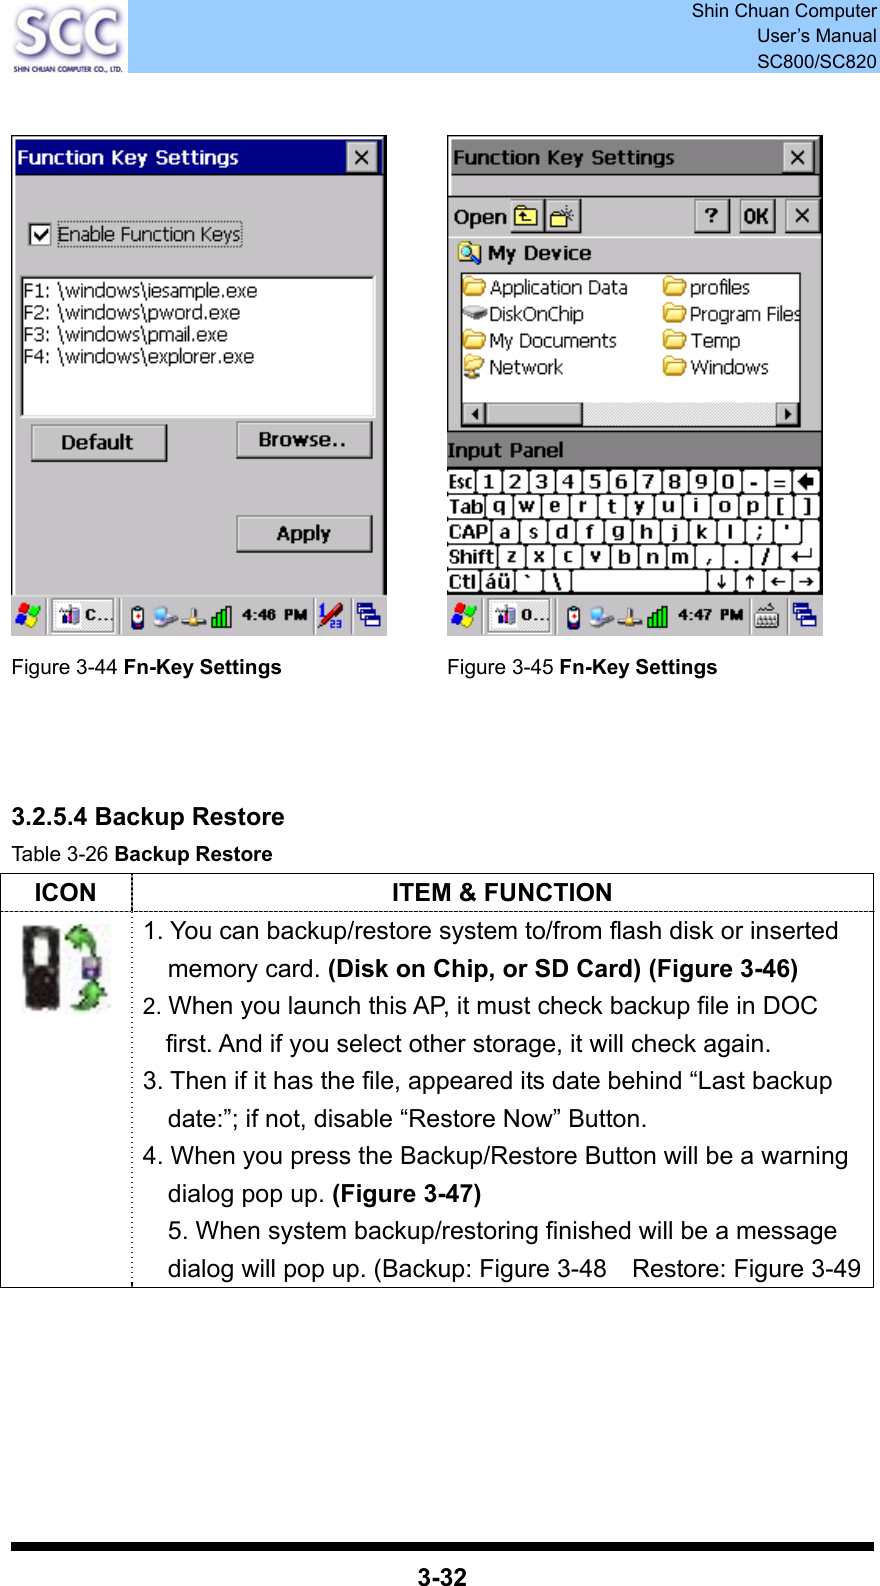  Shin Chuan Computer User’s Manual SC800/SC820  3-32     Figure 3-44 Fn-Key Settings Figure 3-45 Fn-Key Settings    3.2.5.4 Backup Restore Table 3-26 Backup Restore ICON  ITEM &amp; FUNCTION  1. You can backup/restore system to/from flash disk or inserted memory card. (Disk on Chip, or SD Card) (Figure 3-46) 2. When you launch this AP, it must check backup file in DOC first. And if you select other storage, it will check again. 3. Then if it has the file, appeared its date behind “Last backup date:”; if not, disable “Restore Now” Button. 4. When you press the Backup/Restore Button will be a warning dialog pop up. (Figure 3-47) 5. When system backup/restoring finished will be a message dialog will pop up. (Backup: Figure 3-48    Restore: Figure 3-49      